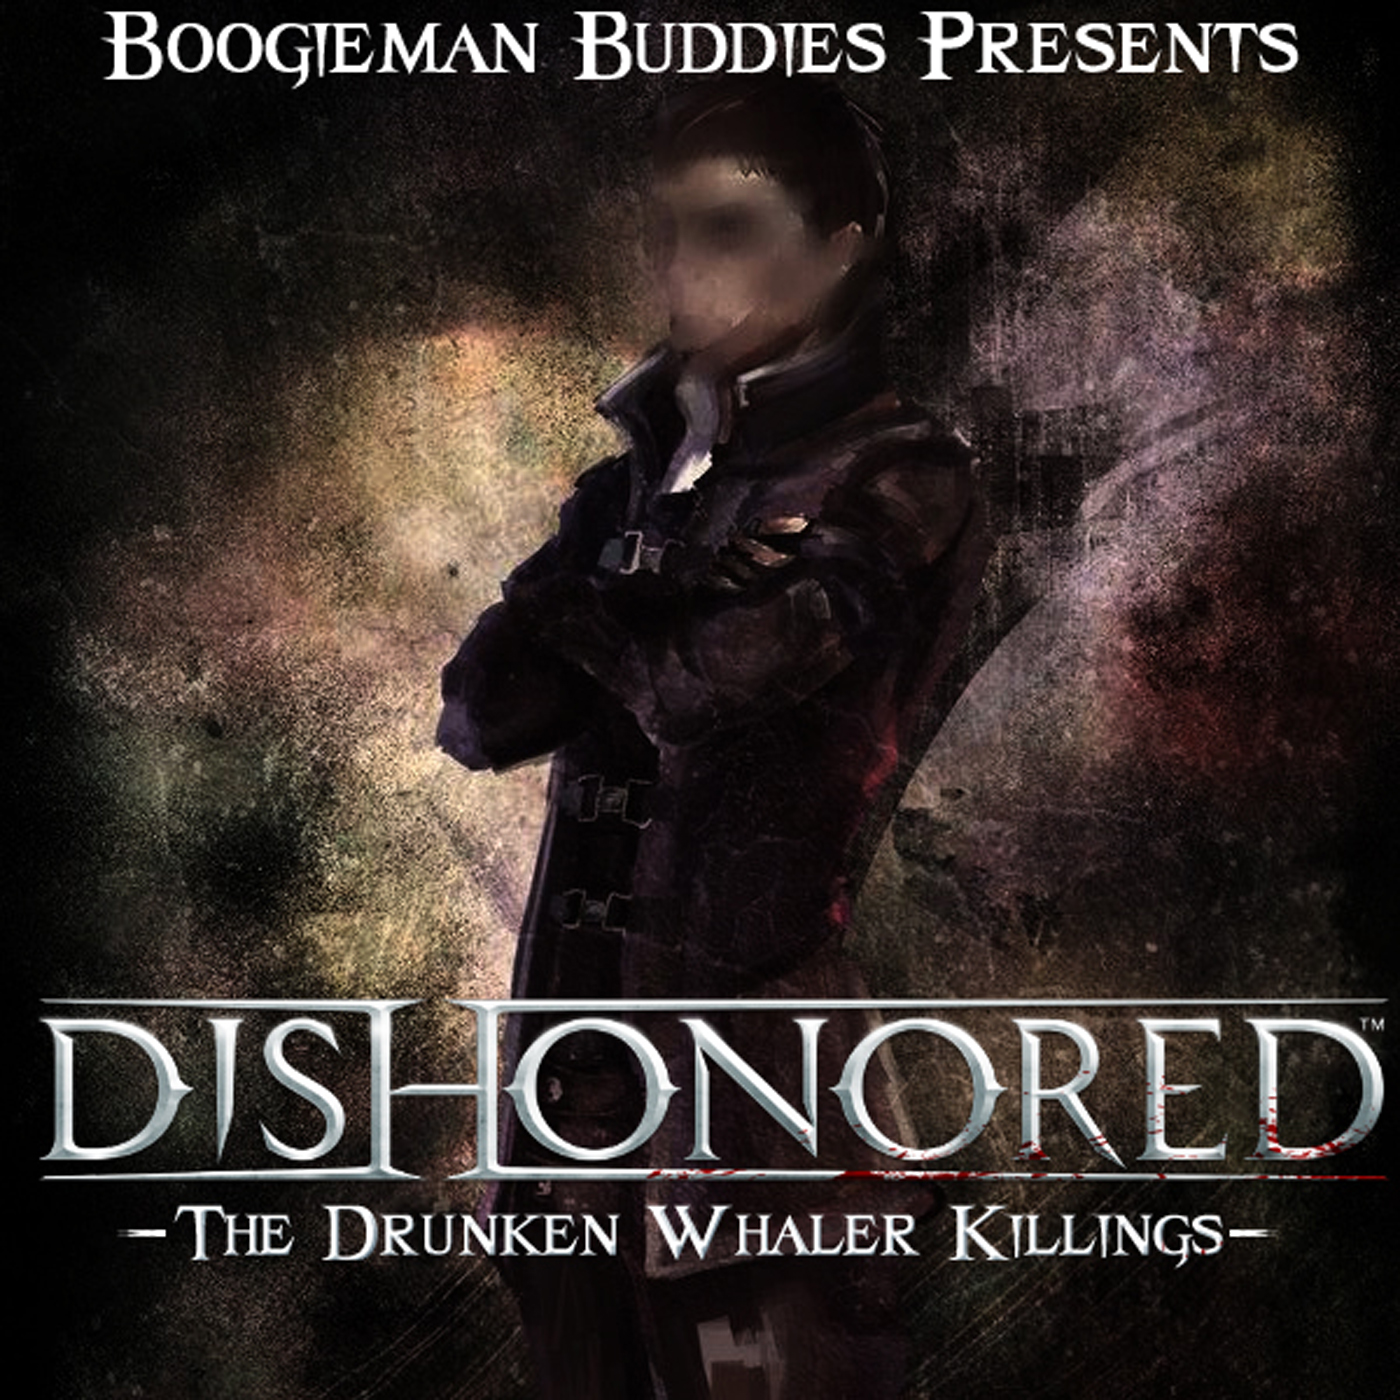 Dishonored: The Drunken Whaler Killings Session 2 - Stuff Him in a Sack and Throw Him Over